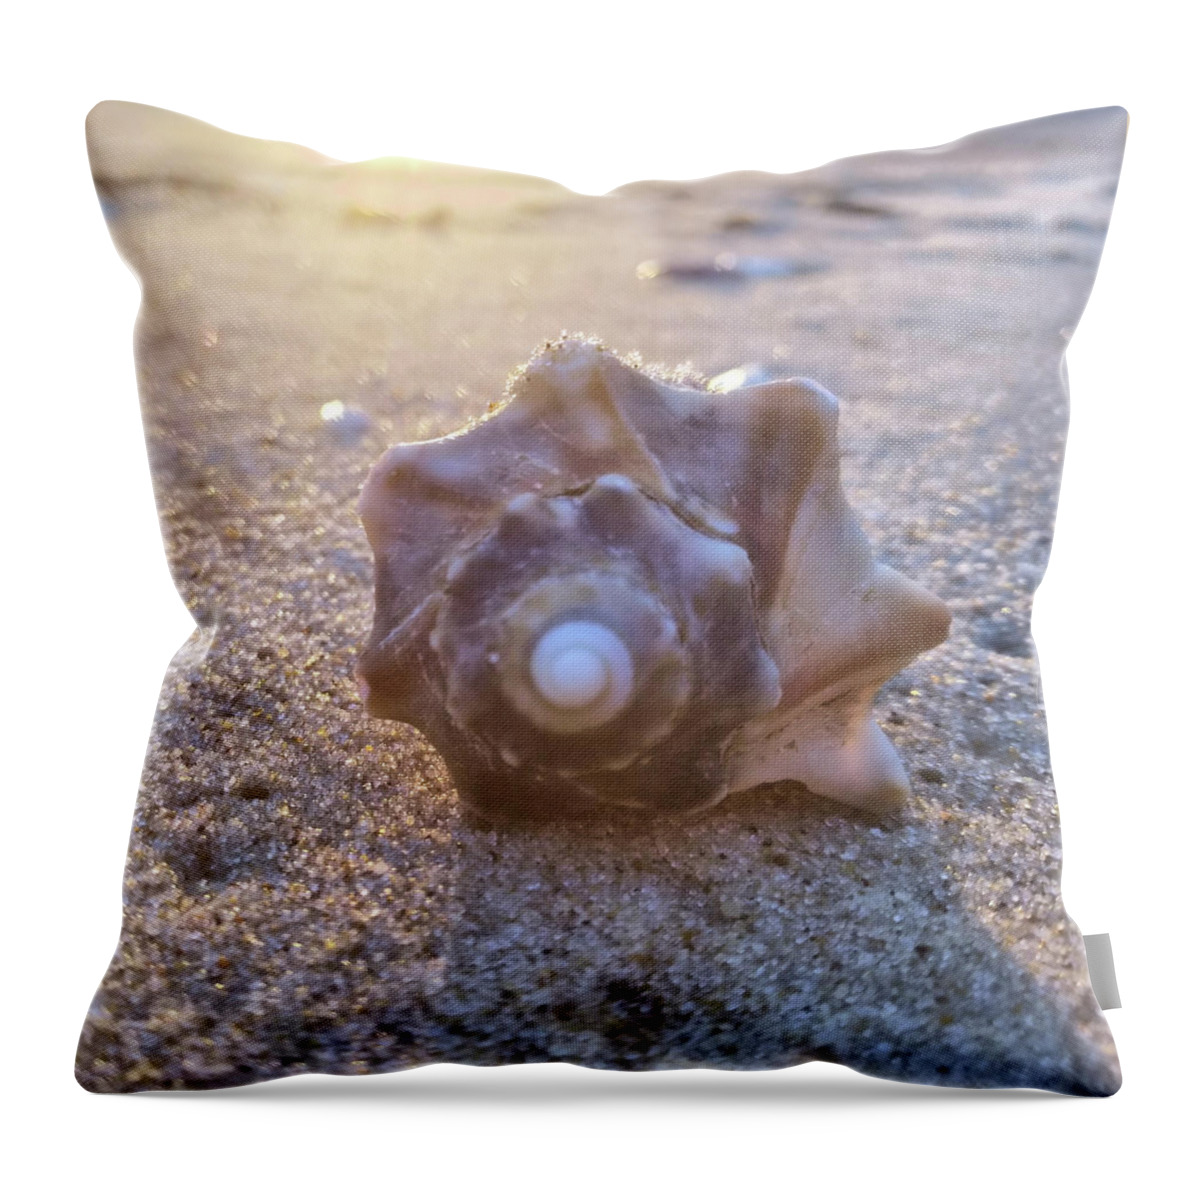 Nuclear Whorl Throw Pillow featuring the photograph Nuclear Whorl by Robert Banach